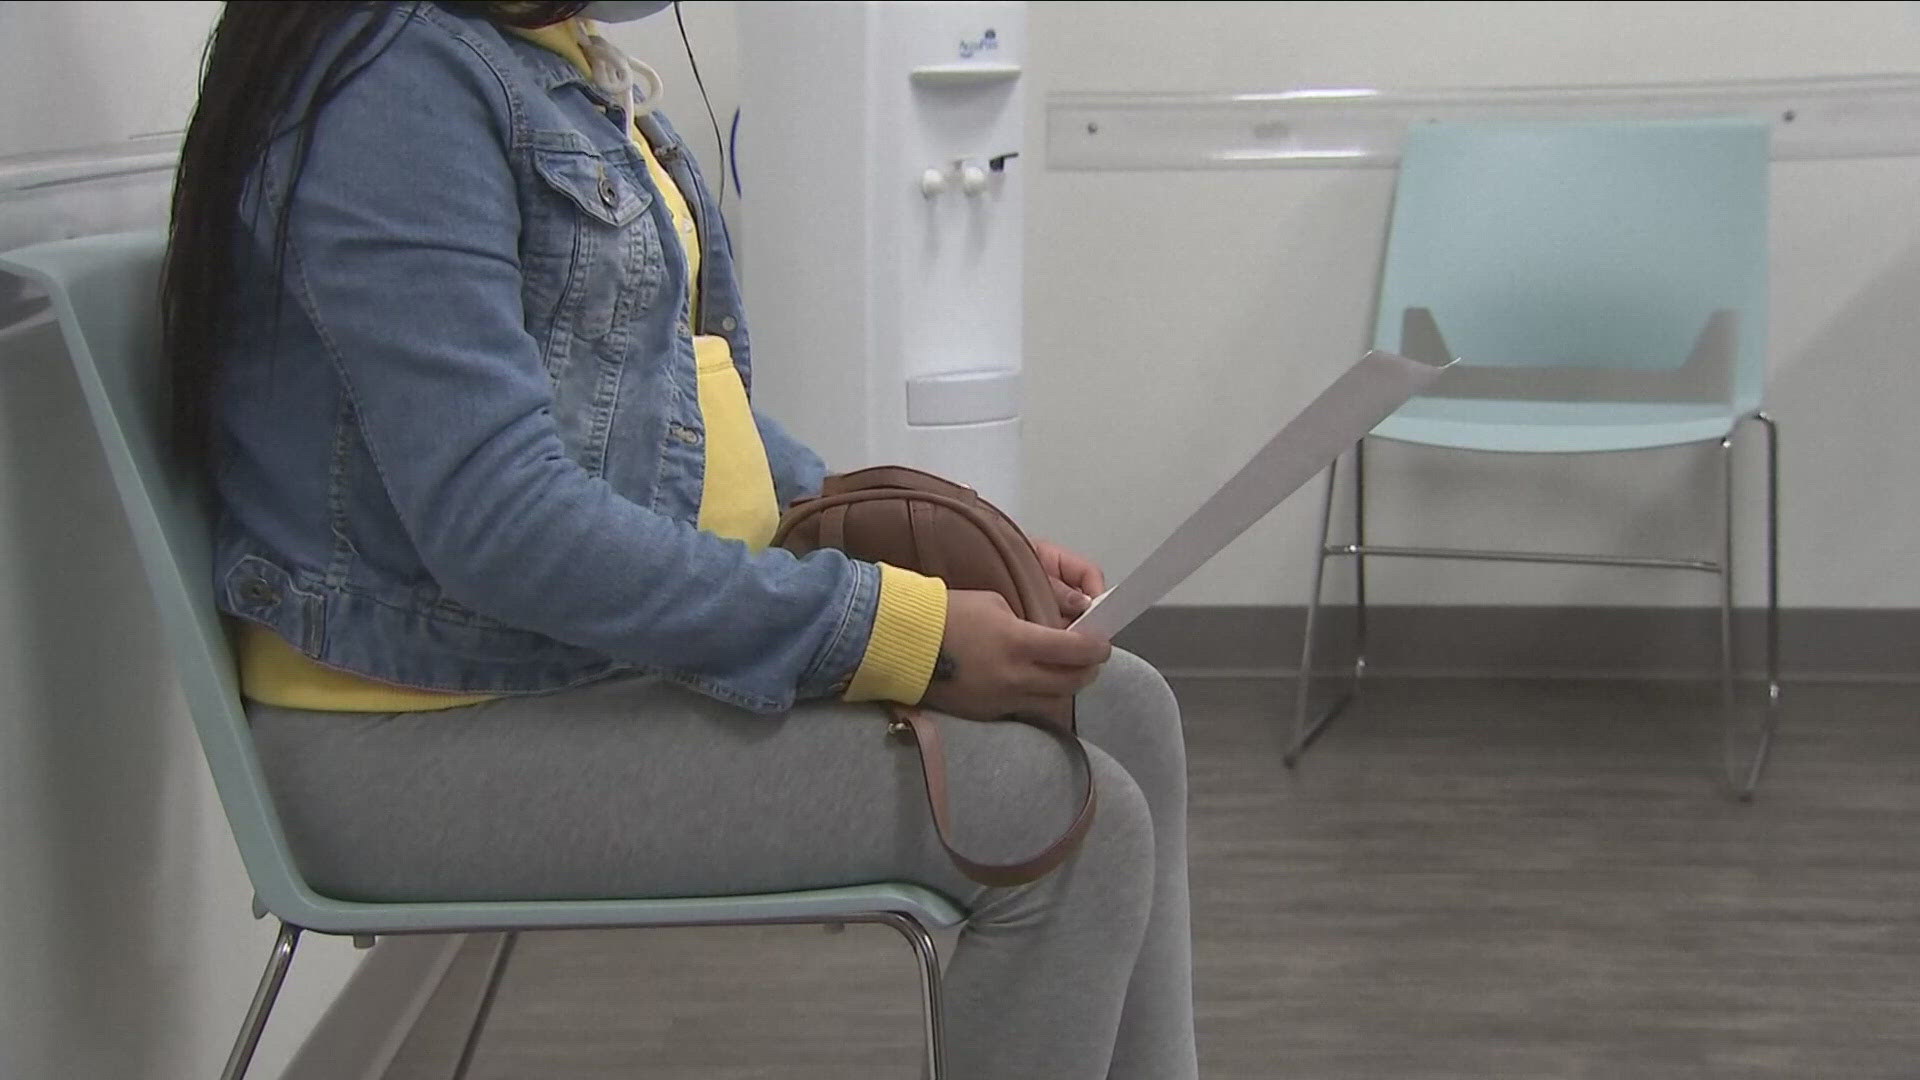 Pregnant women across New York State will now get paid leave for prenatal care